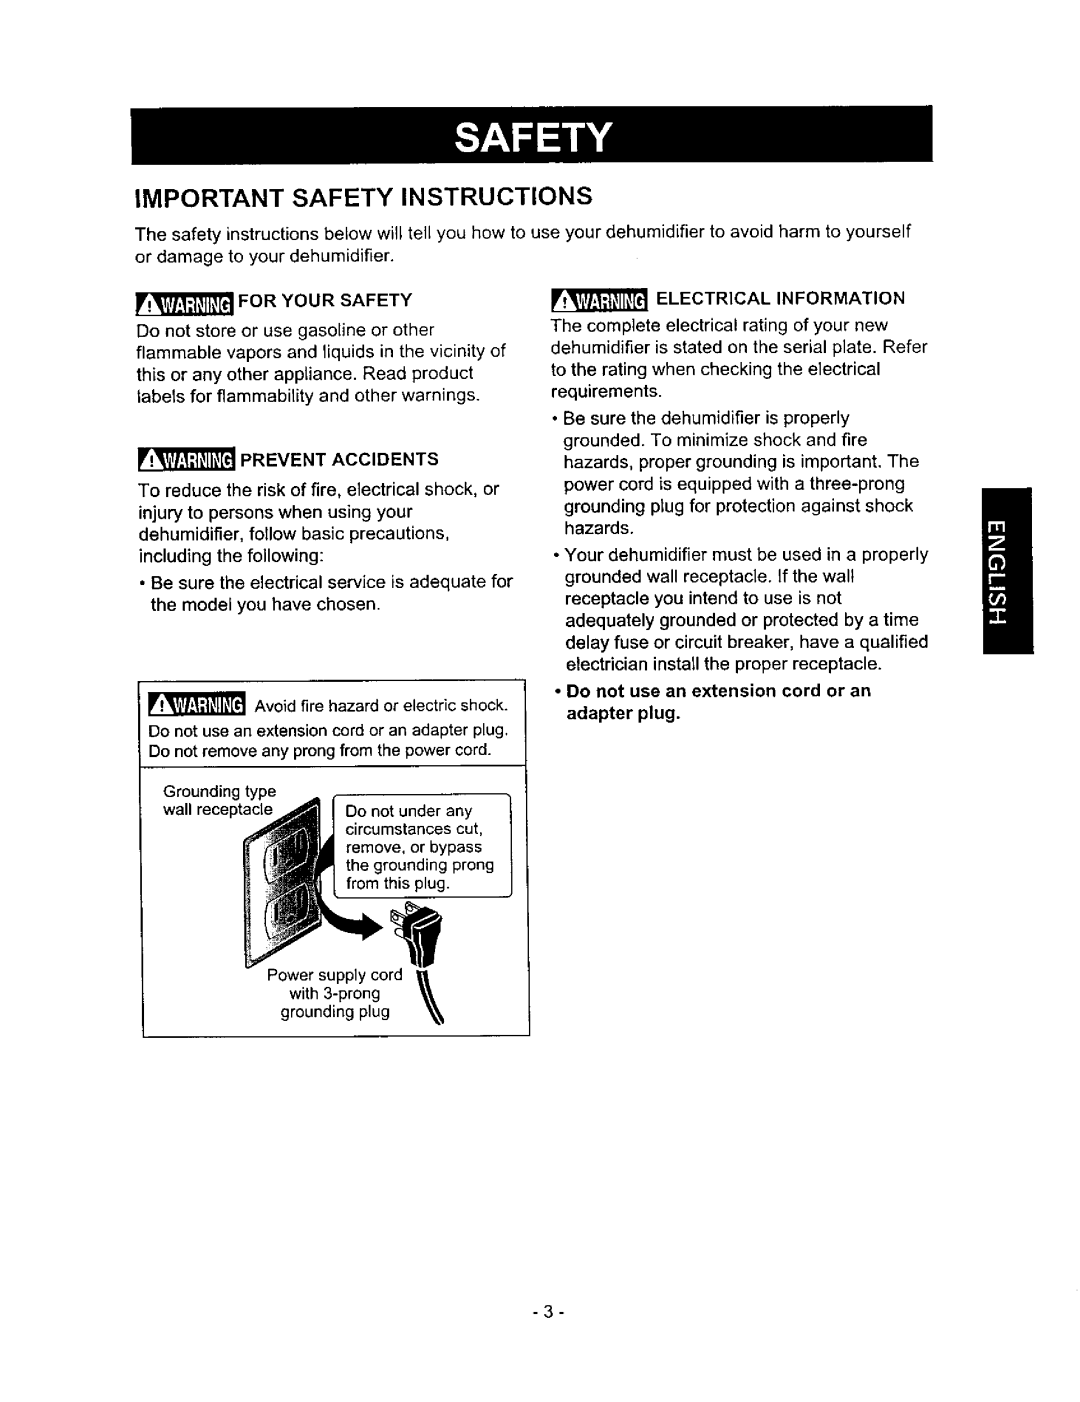 Kenmore 580.513 Important Safety Instructions, For Your Safety, Prevent Accidents, grounded wall receptacle. If the walt 